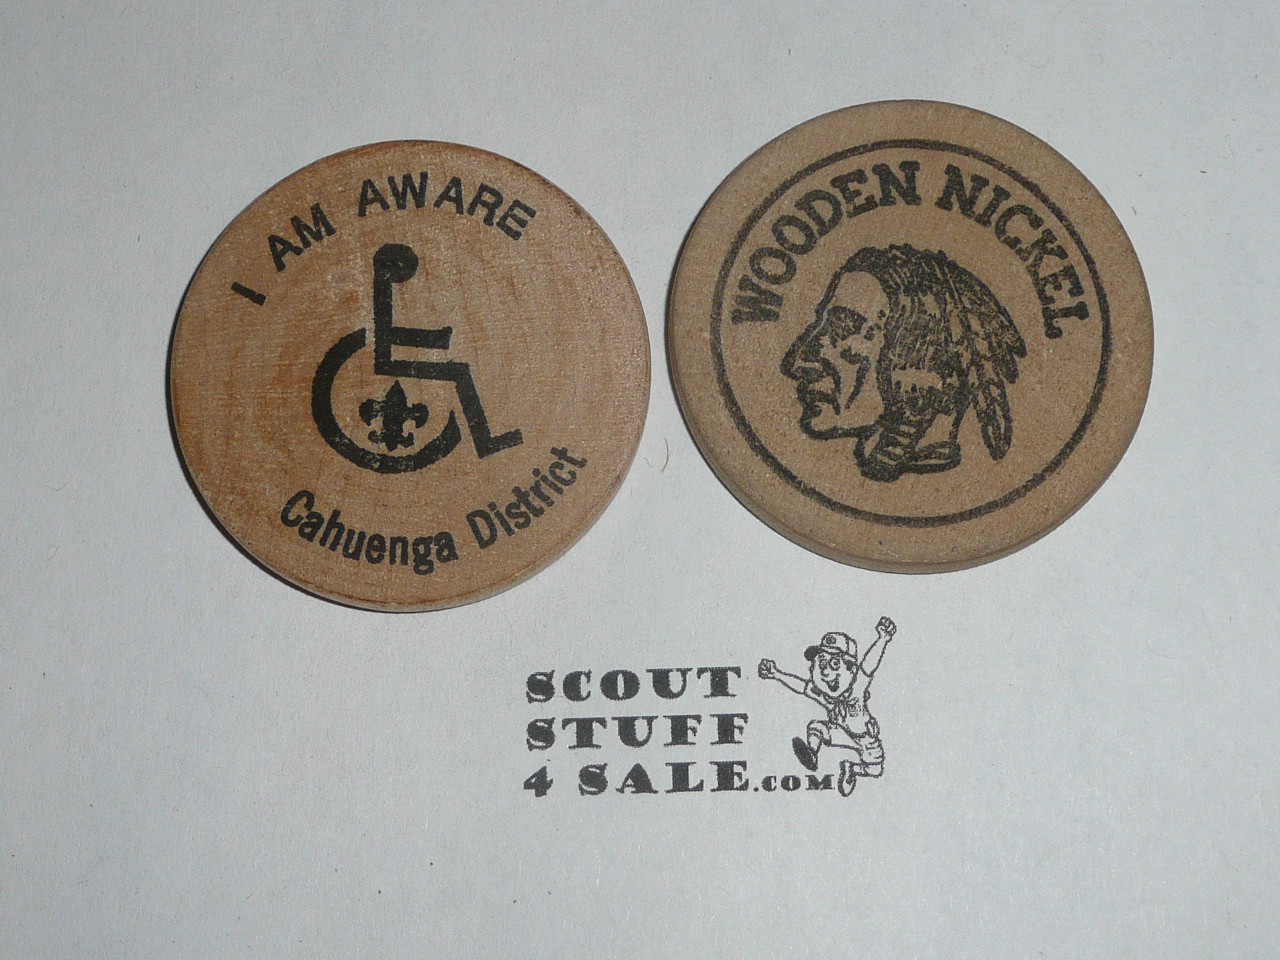 Great Western Council, I am Aware, Handicapped Boy Scout Wooden Nickel